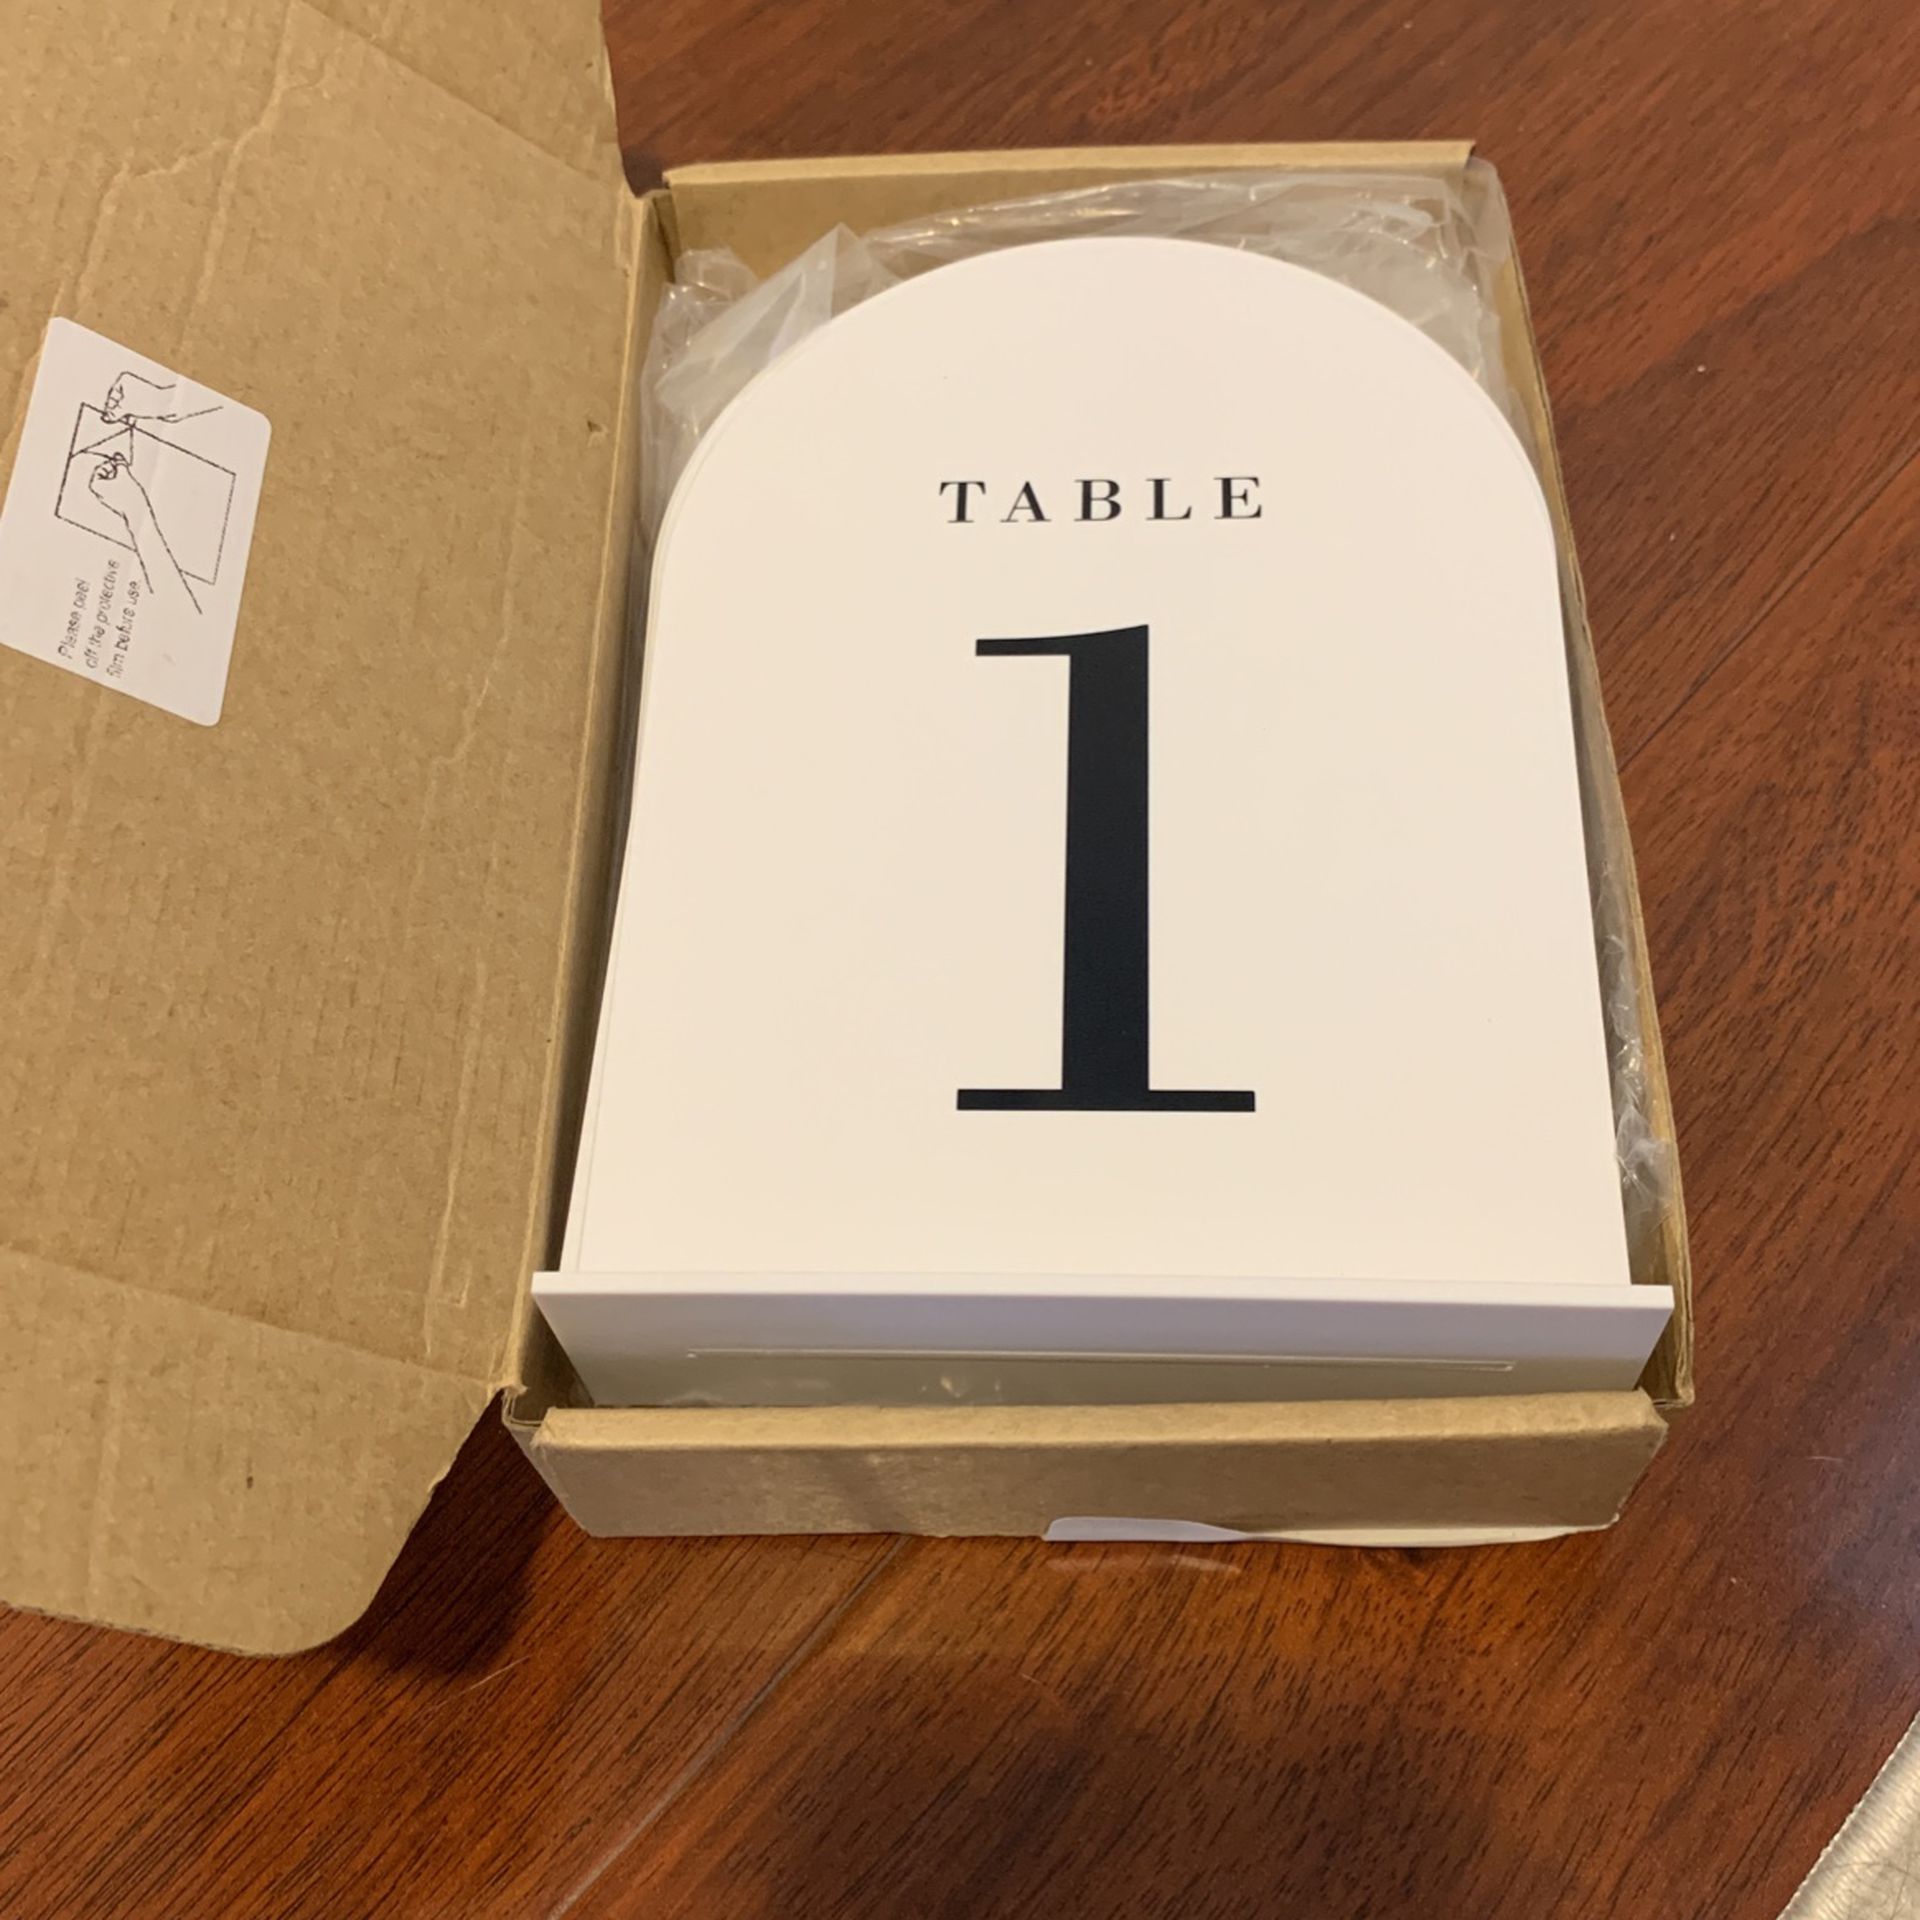 Full Set of Table Numbers for Events (1-15)